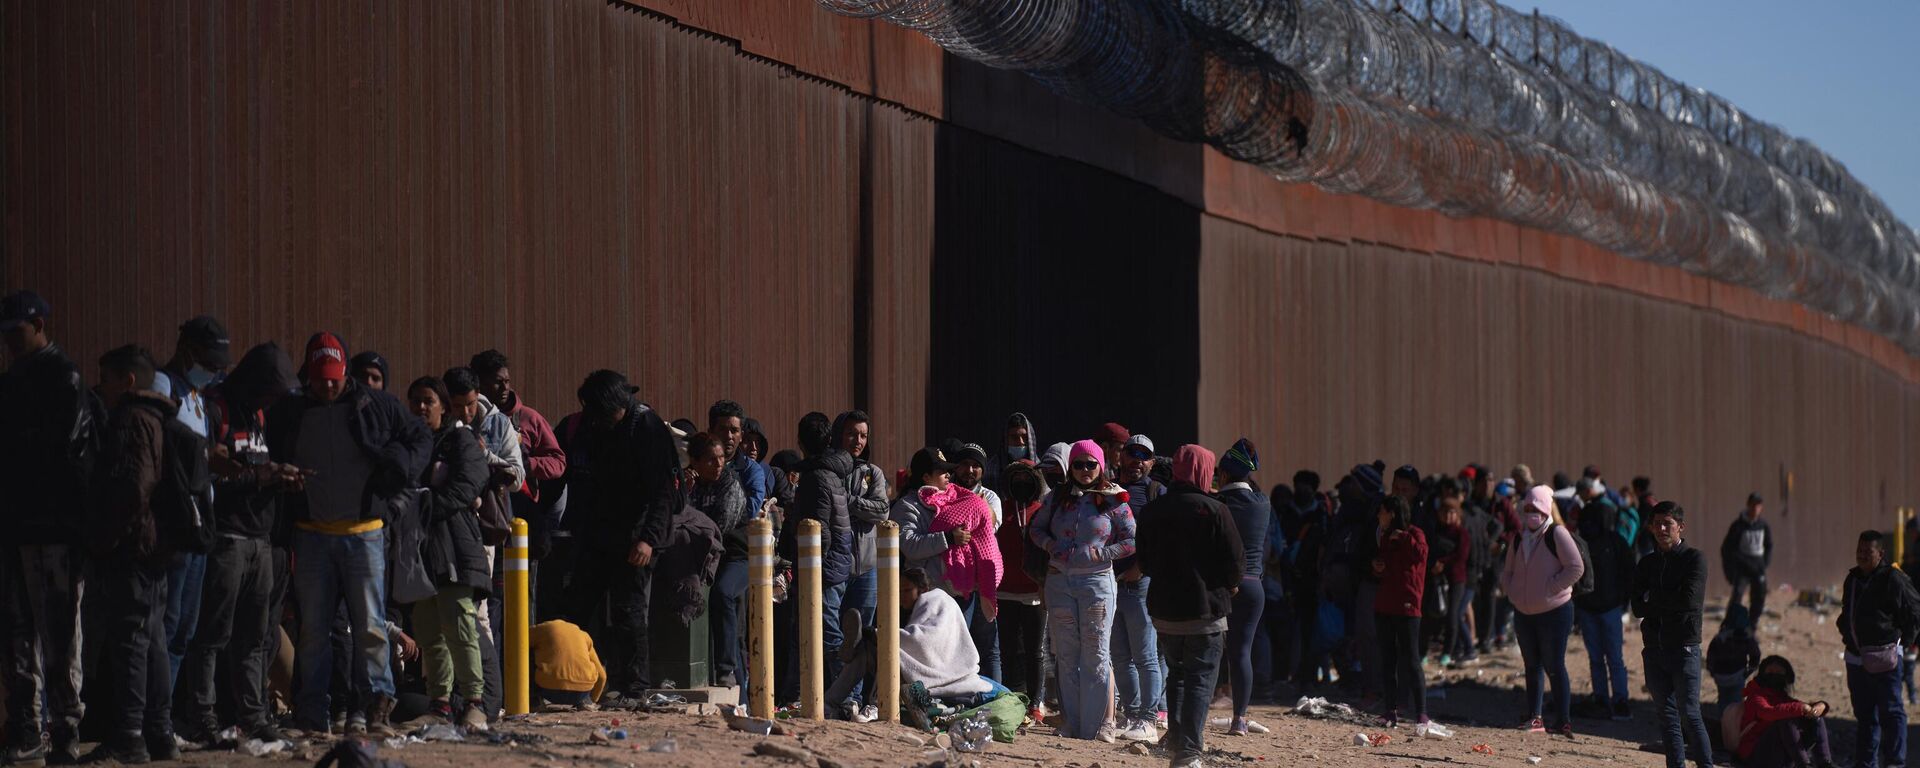 Hundreds of migrants line up to be processed by US Border Patrol under the Stanton Street Bridge after illegally entering the US, in El Paso, Texas, on December 22, 2022 - Sputnik International, 1920, 02.02.2023